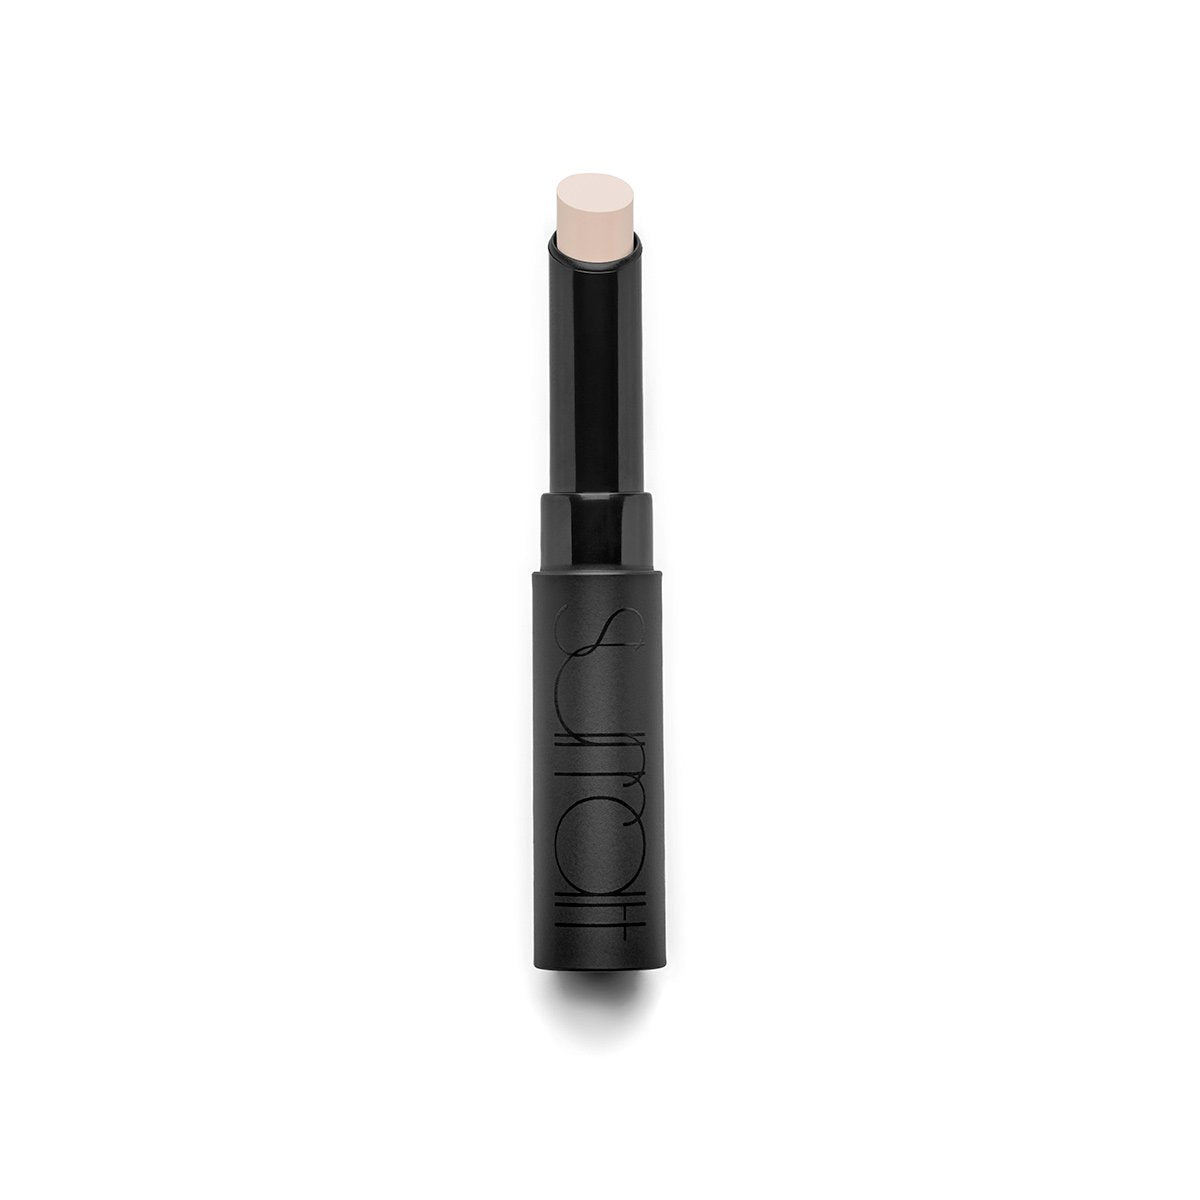 1 - VERY FAIR WITH PINK UNDERTONES - full-coverage cream concealer stick in very fair with pink undertones shade one